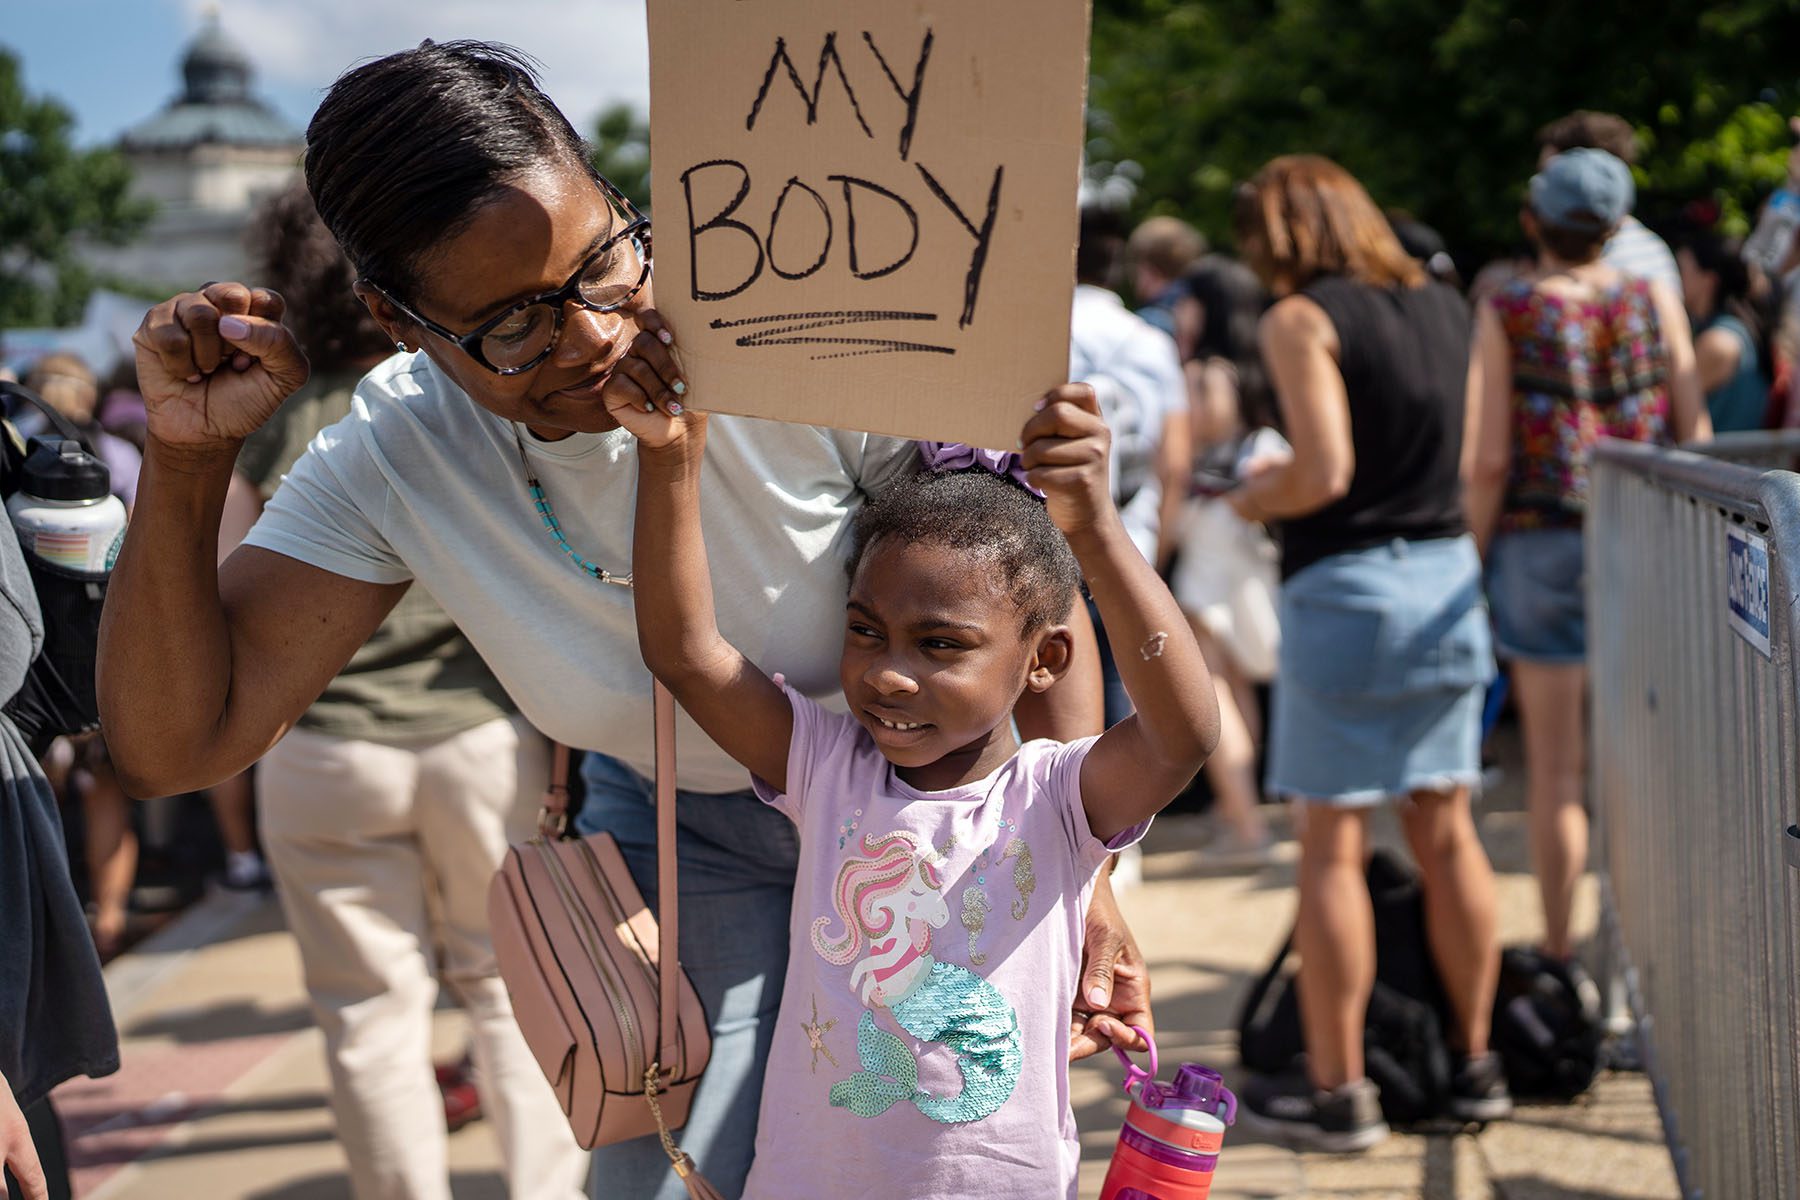 Roxanne Brown smiles as she looks at her daughter. Her daughter is holding a sign that reads "My body."